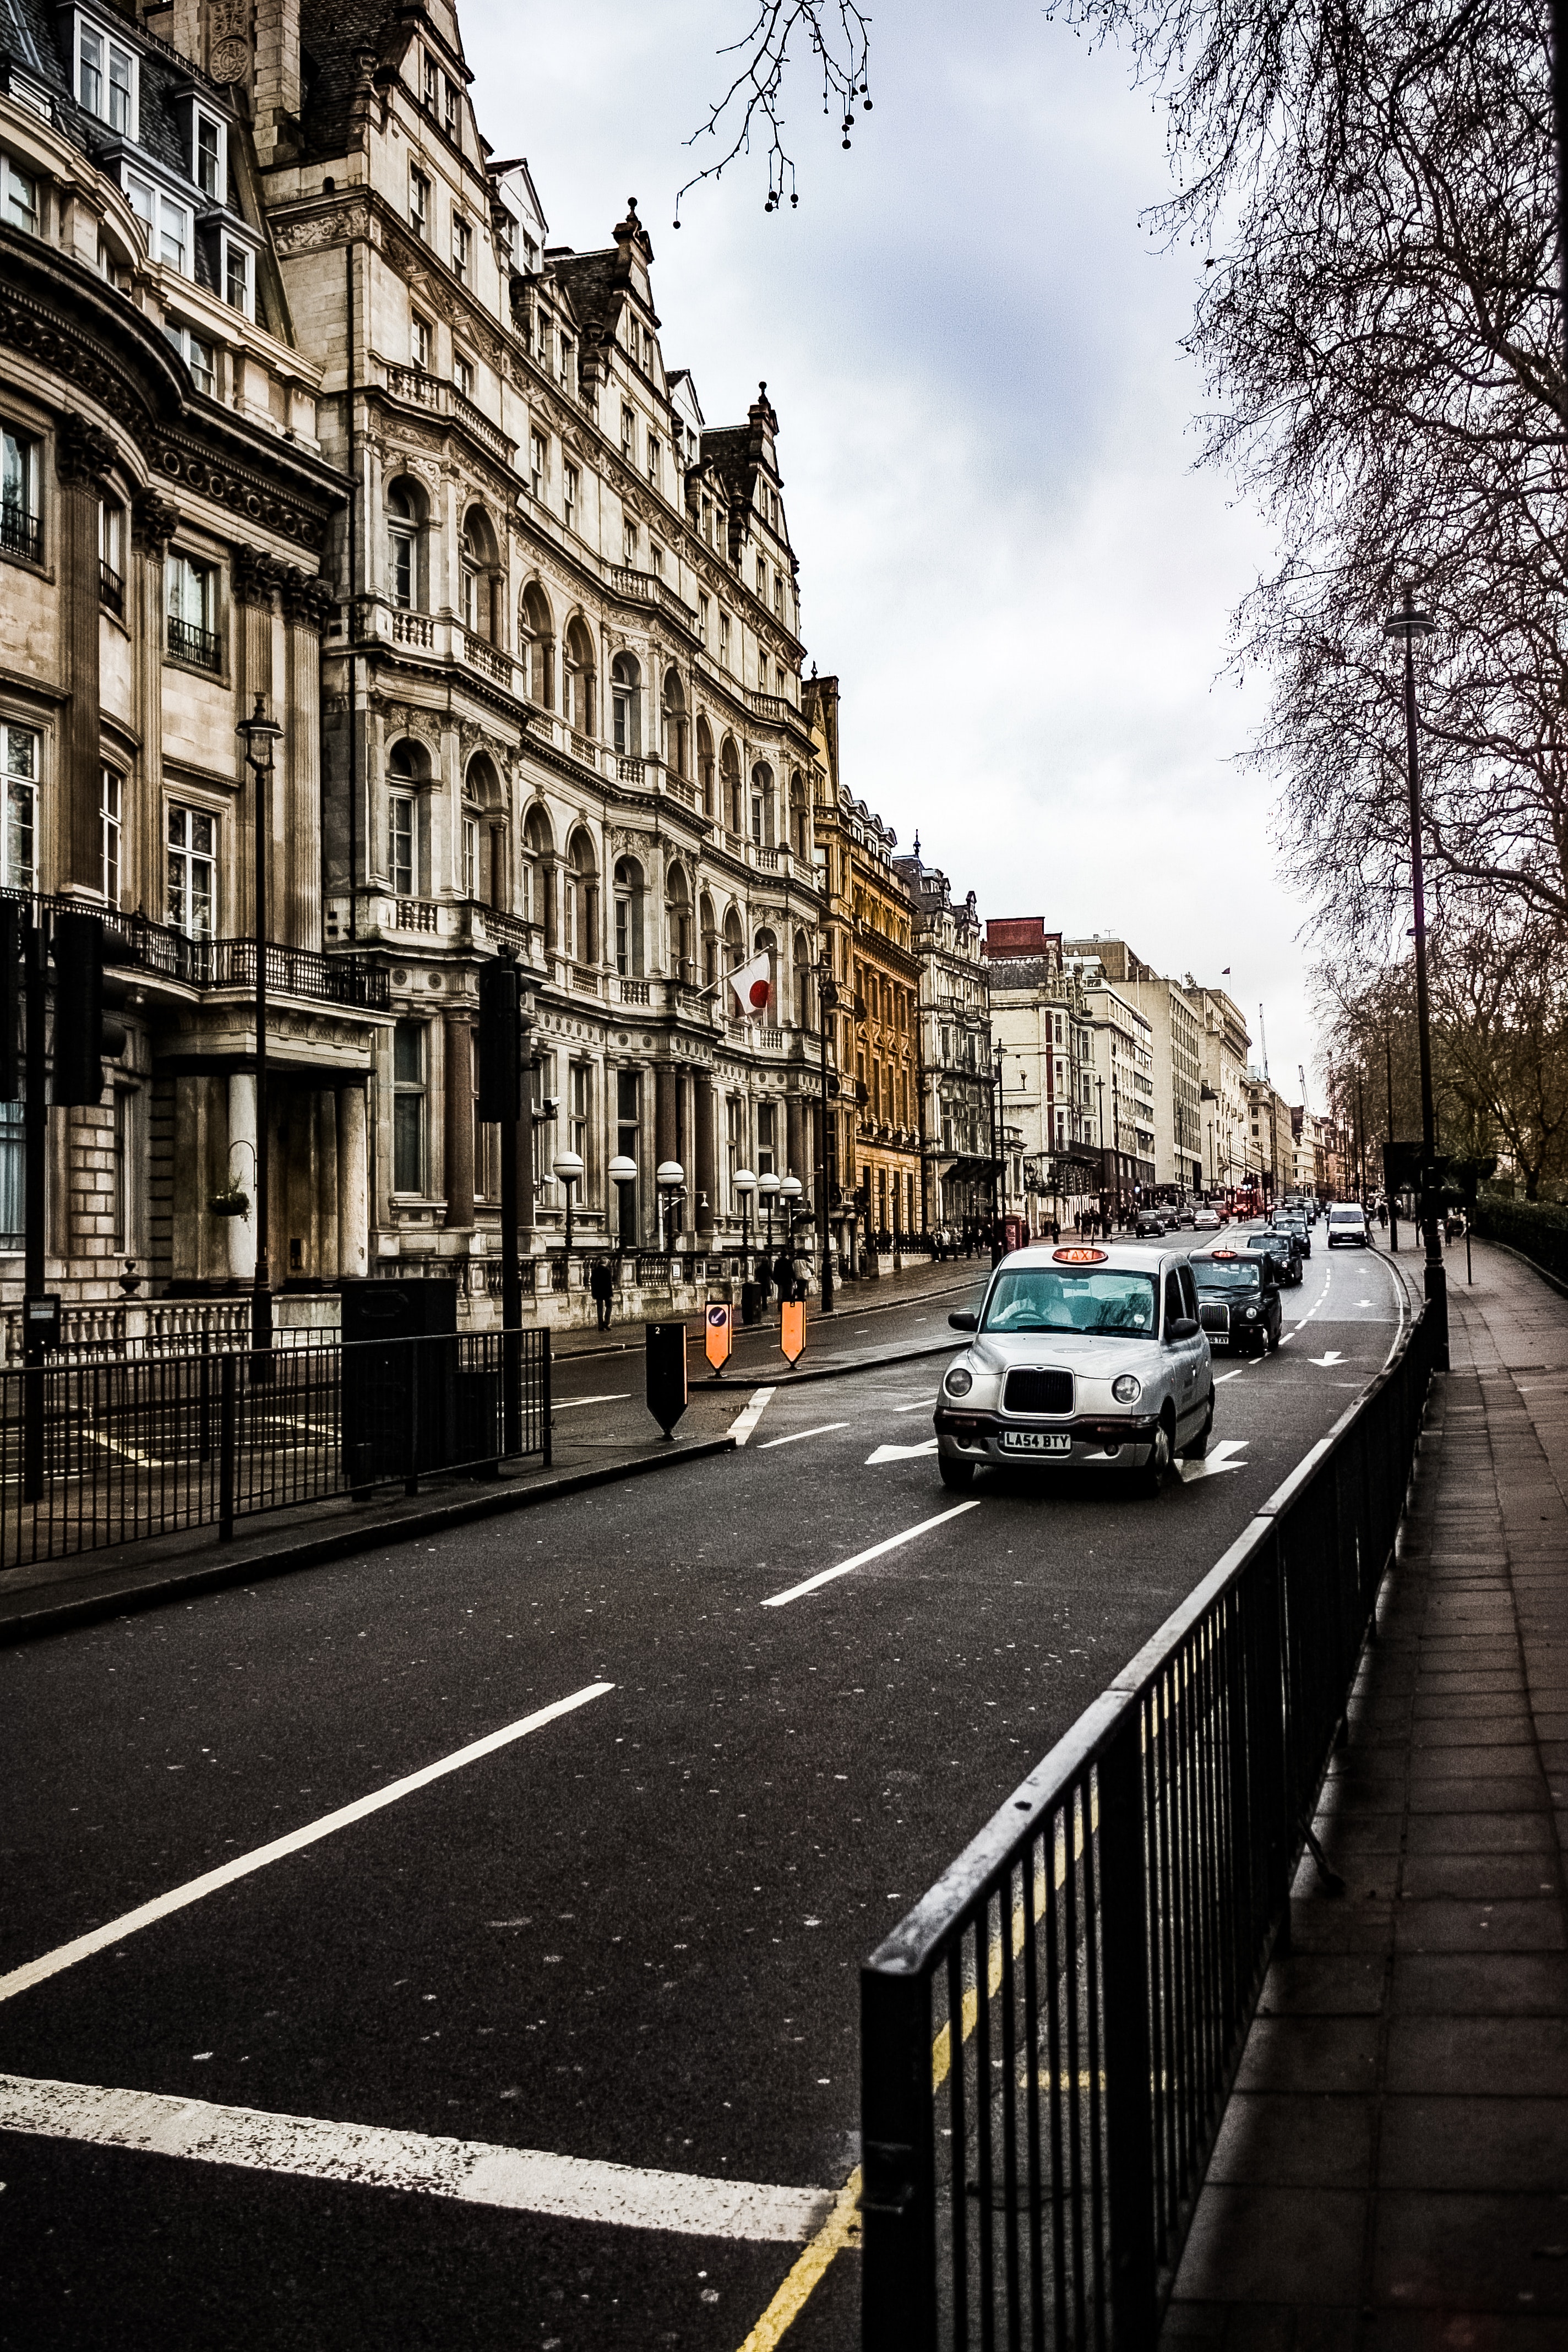 5 Reasons to invest in London’s property market